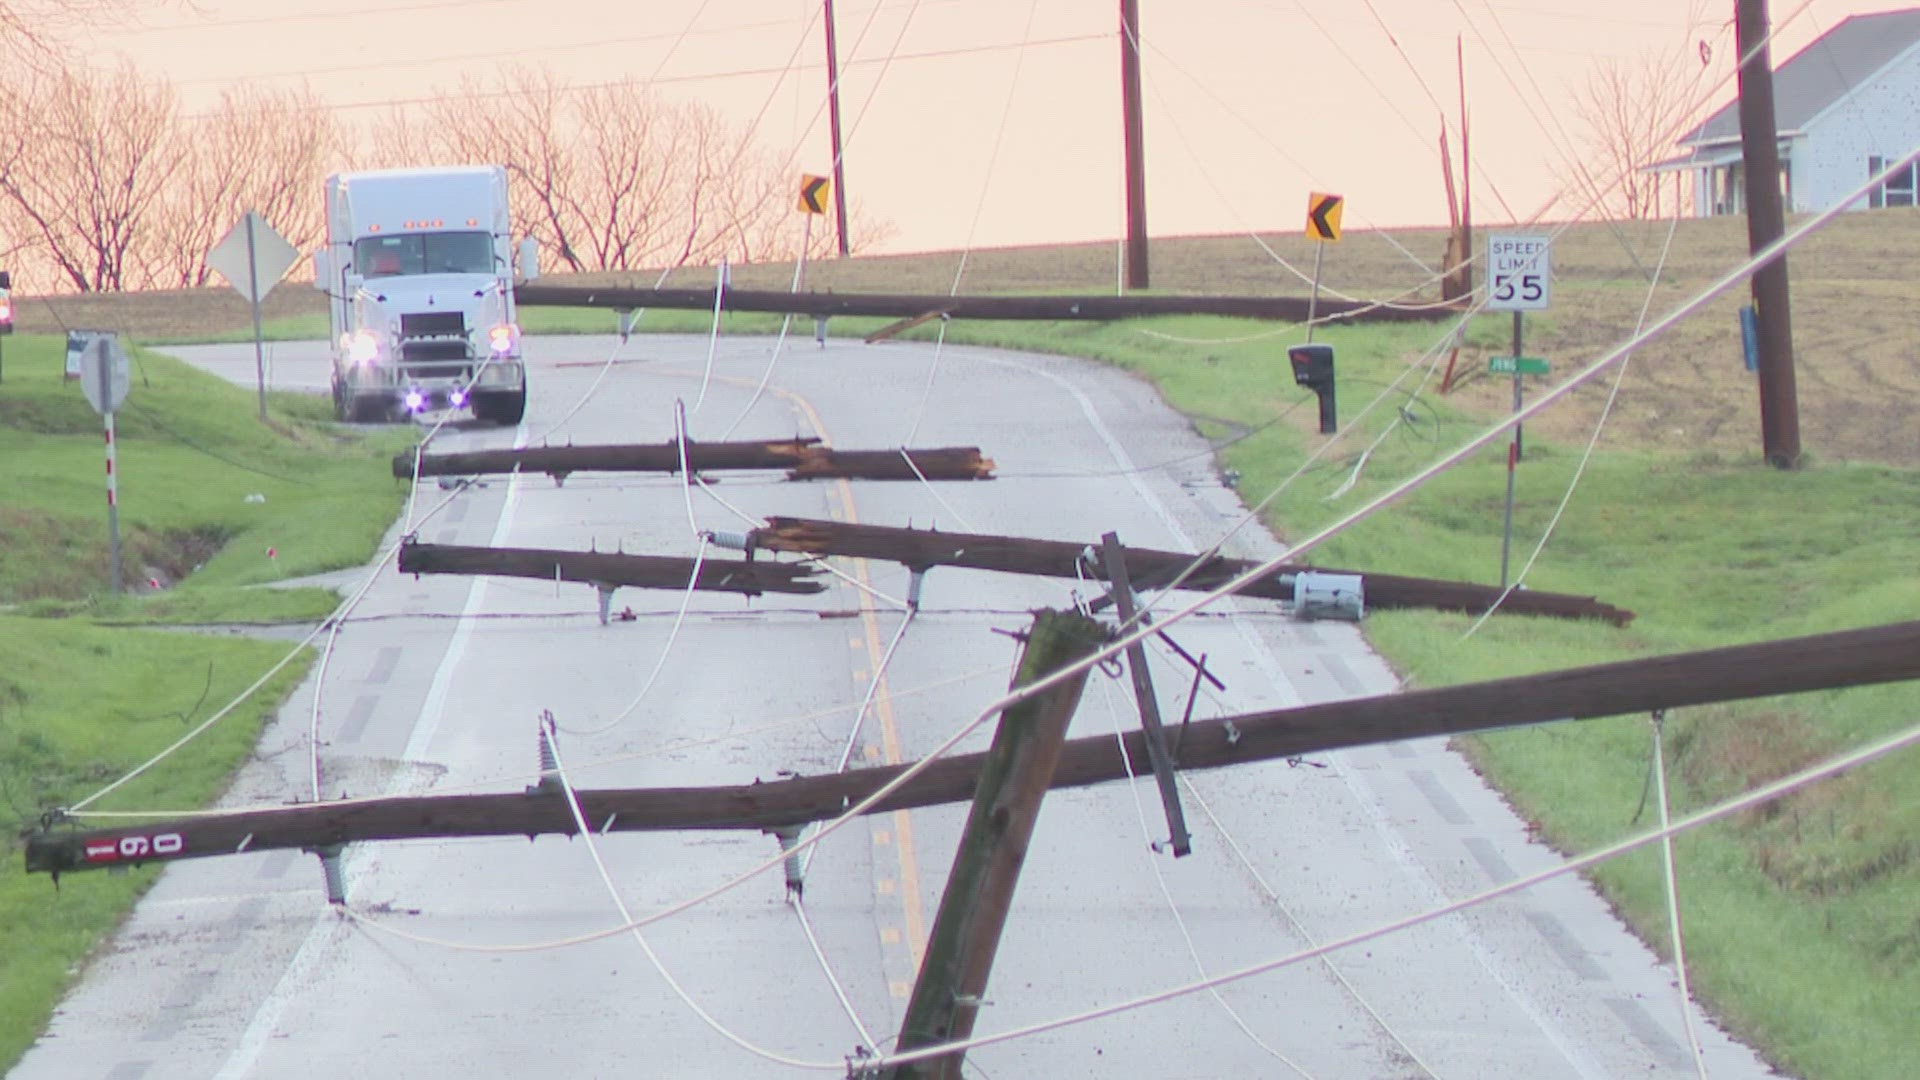 During the peak of the storms, Ameren Illinois said about one thousand customers were without power in Chester. That included an assisted living facility.